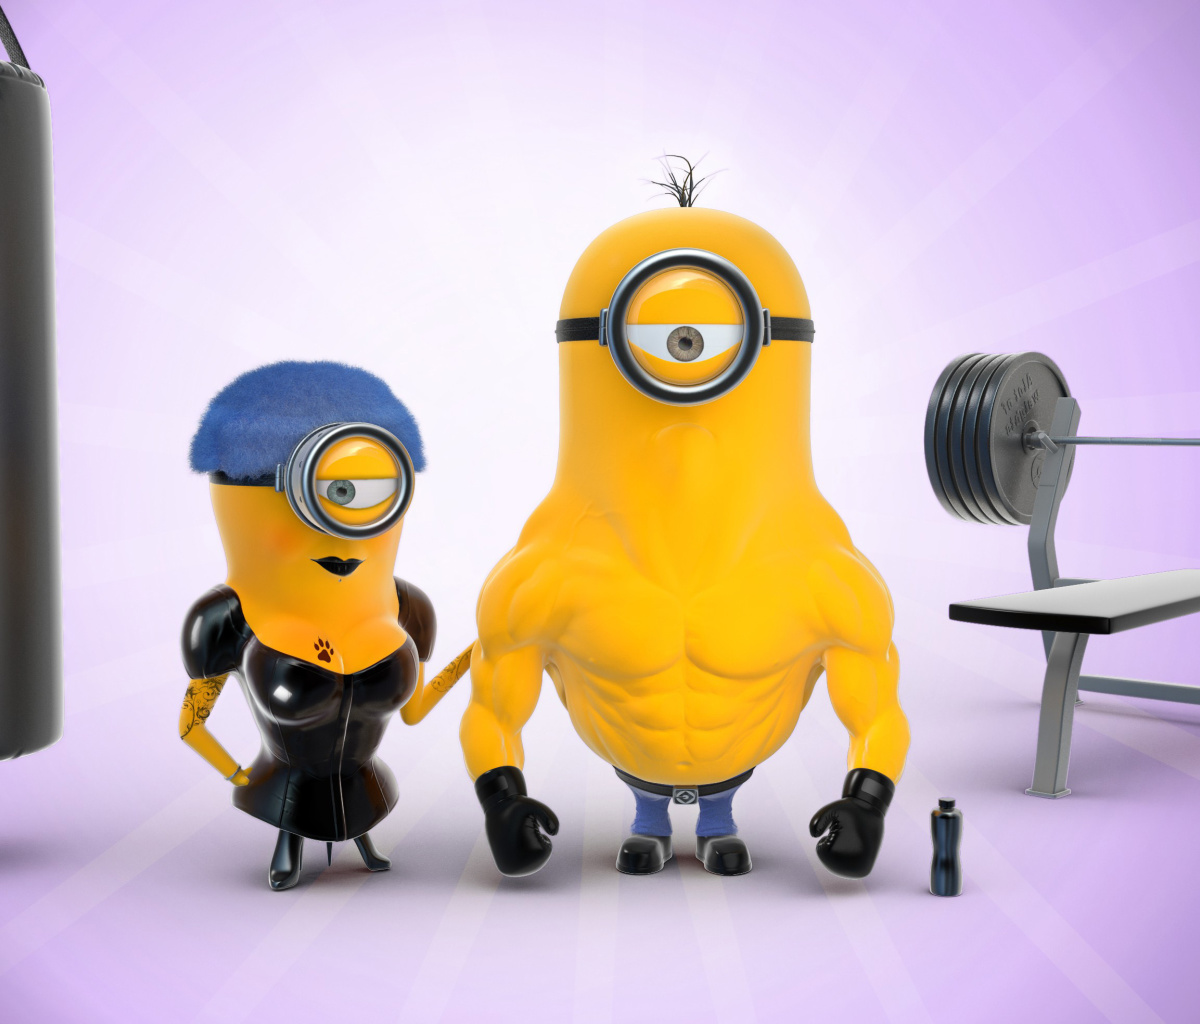 Despicable Me 2 in Gym screenshot #1 1200x1024